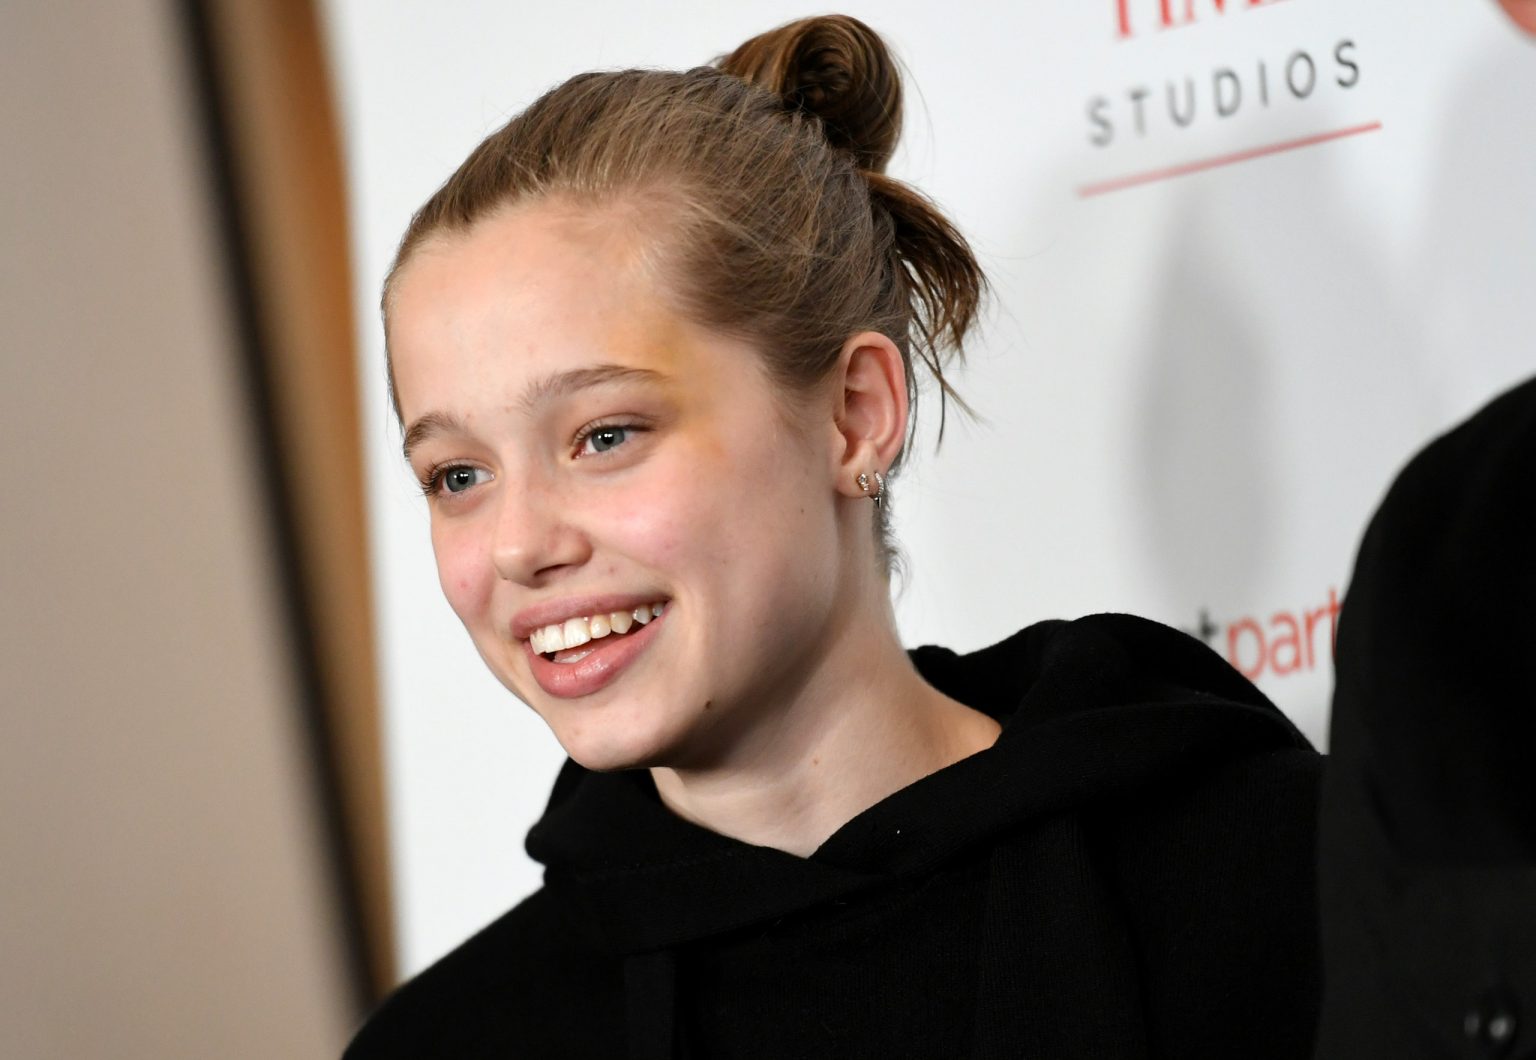 Shiloh JoliePitt Biography Age, Height, Parents, Siblings, Net Worth